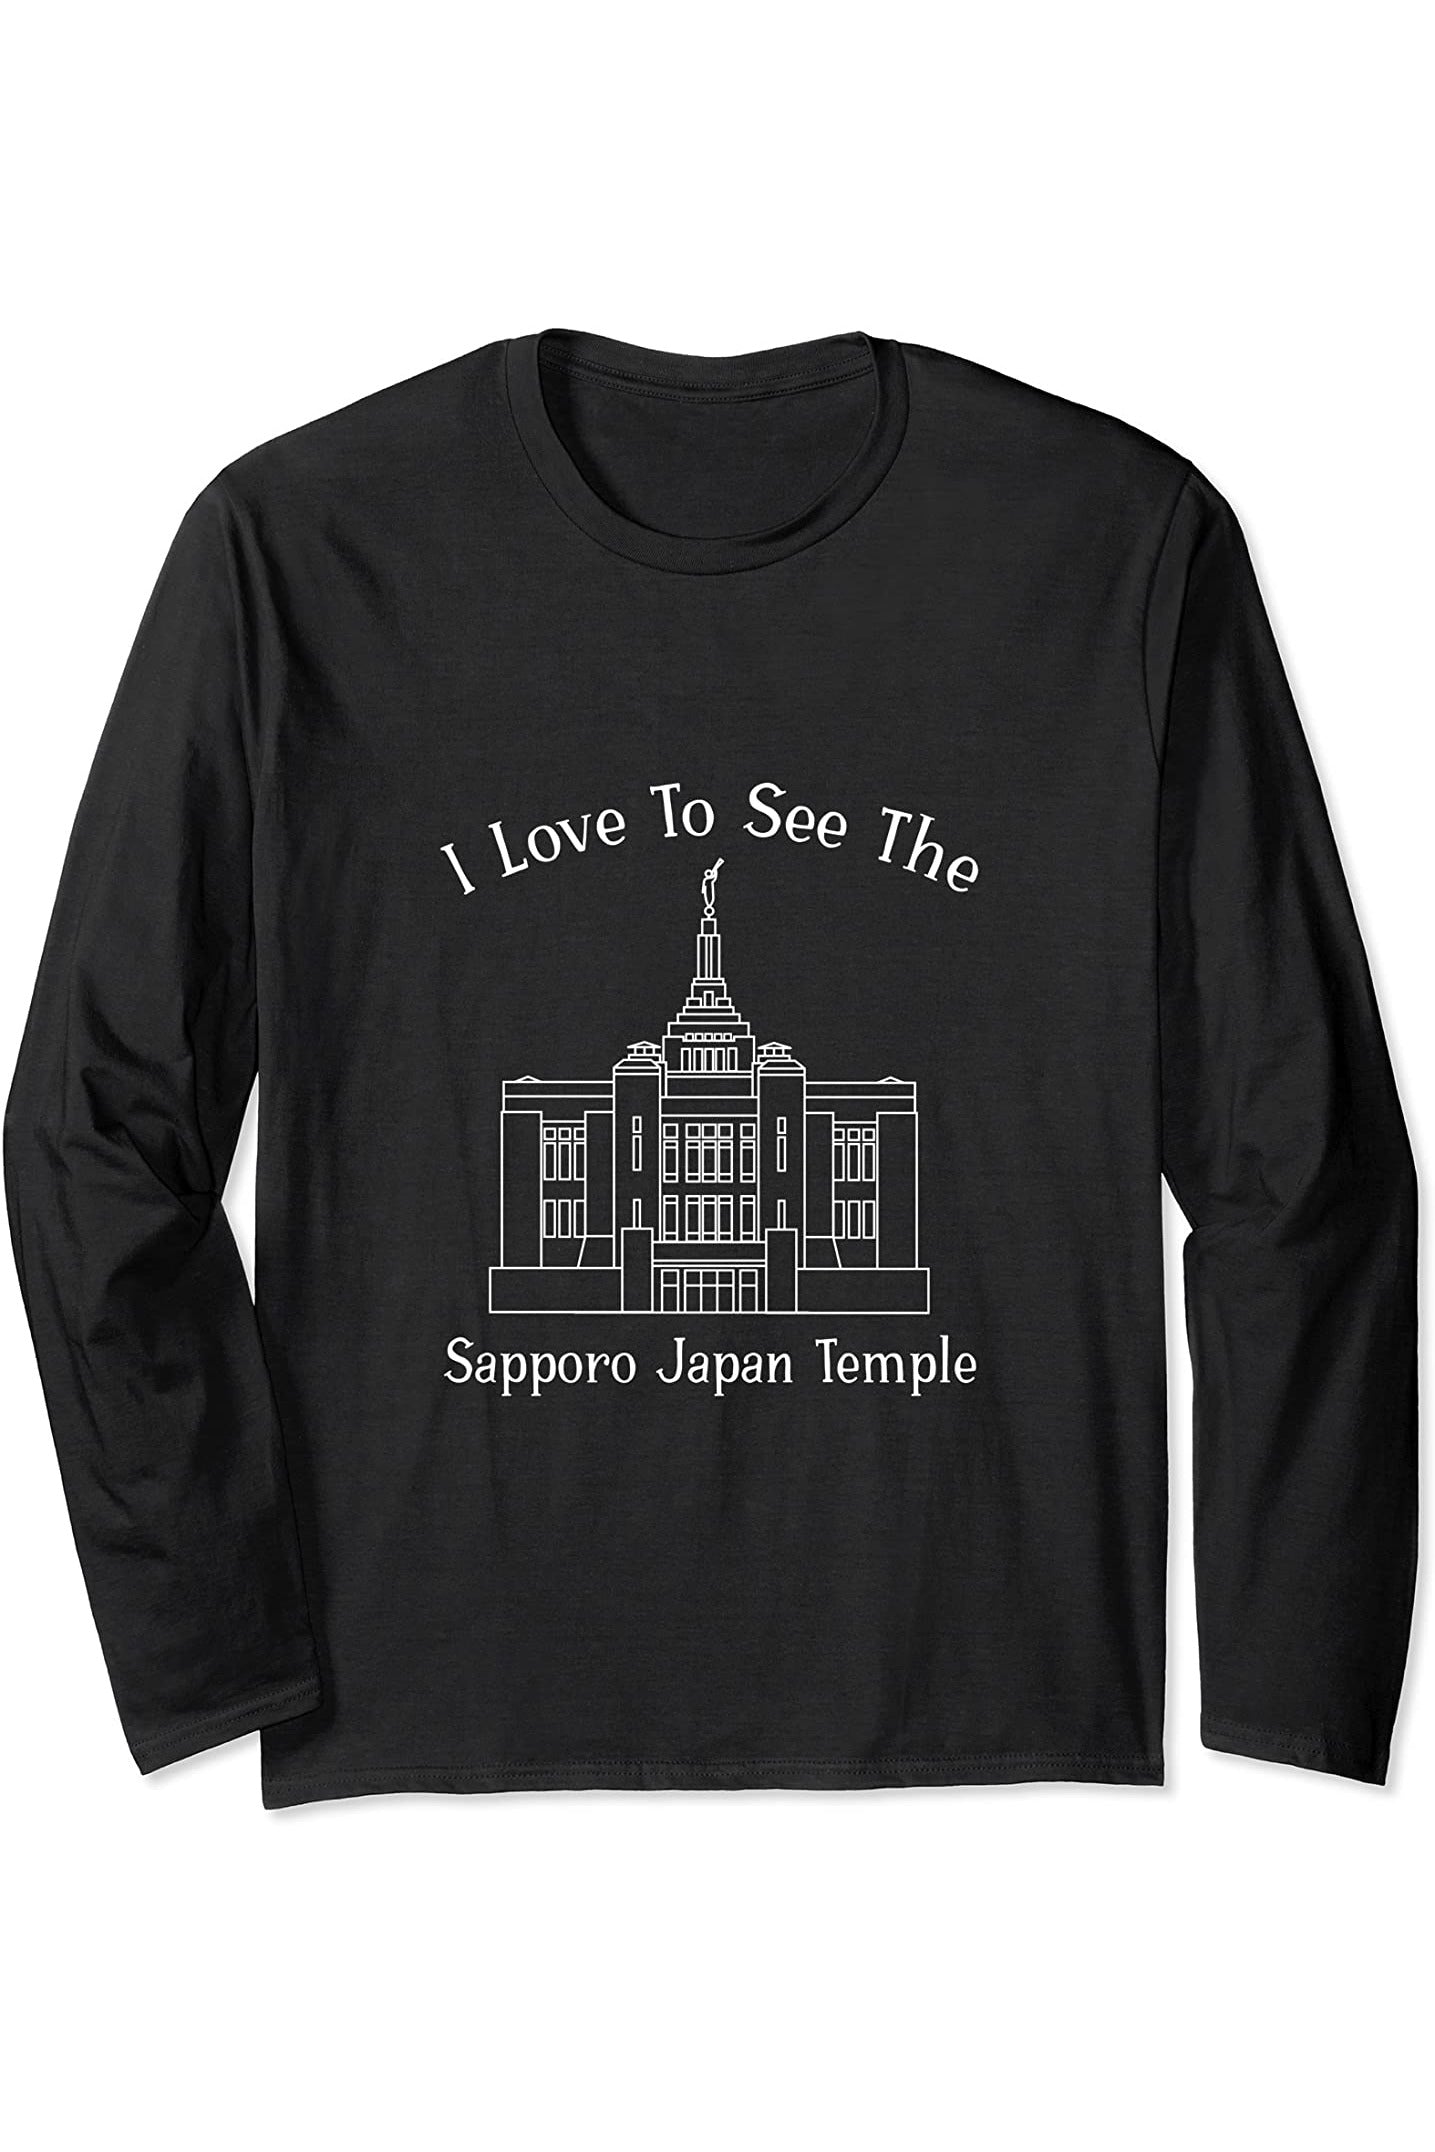 Sapporo Japan Temple Long Sleeve T-Shirt - Happy Style (English) US